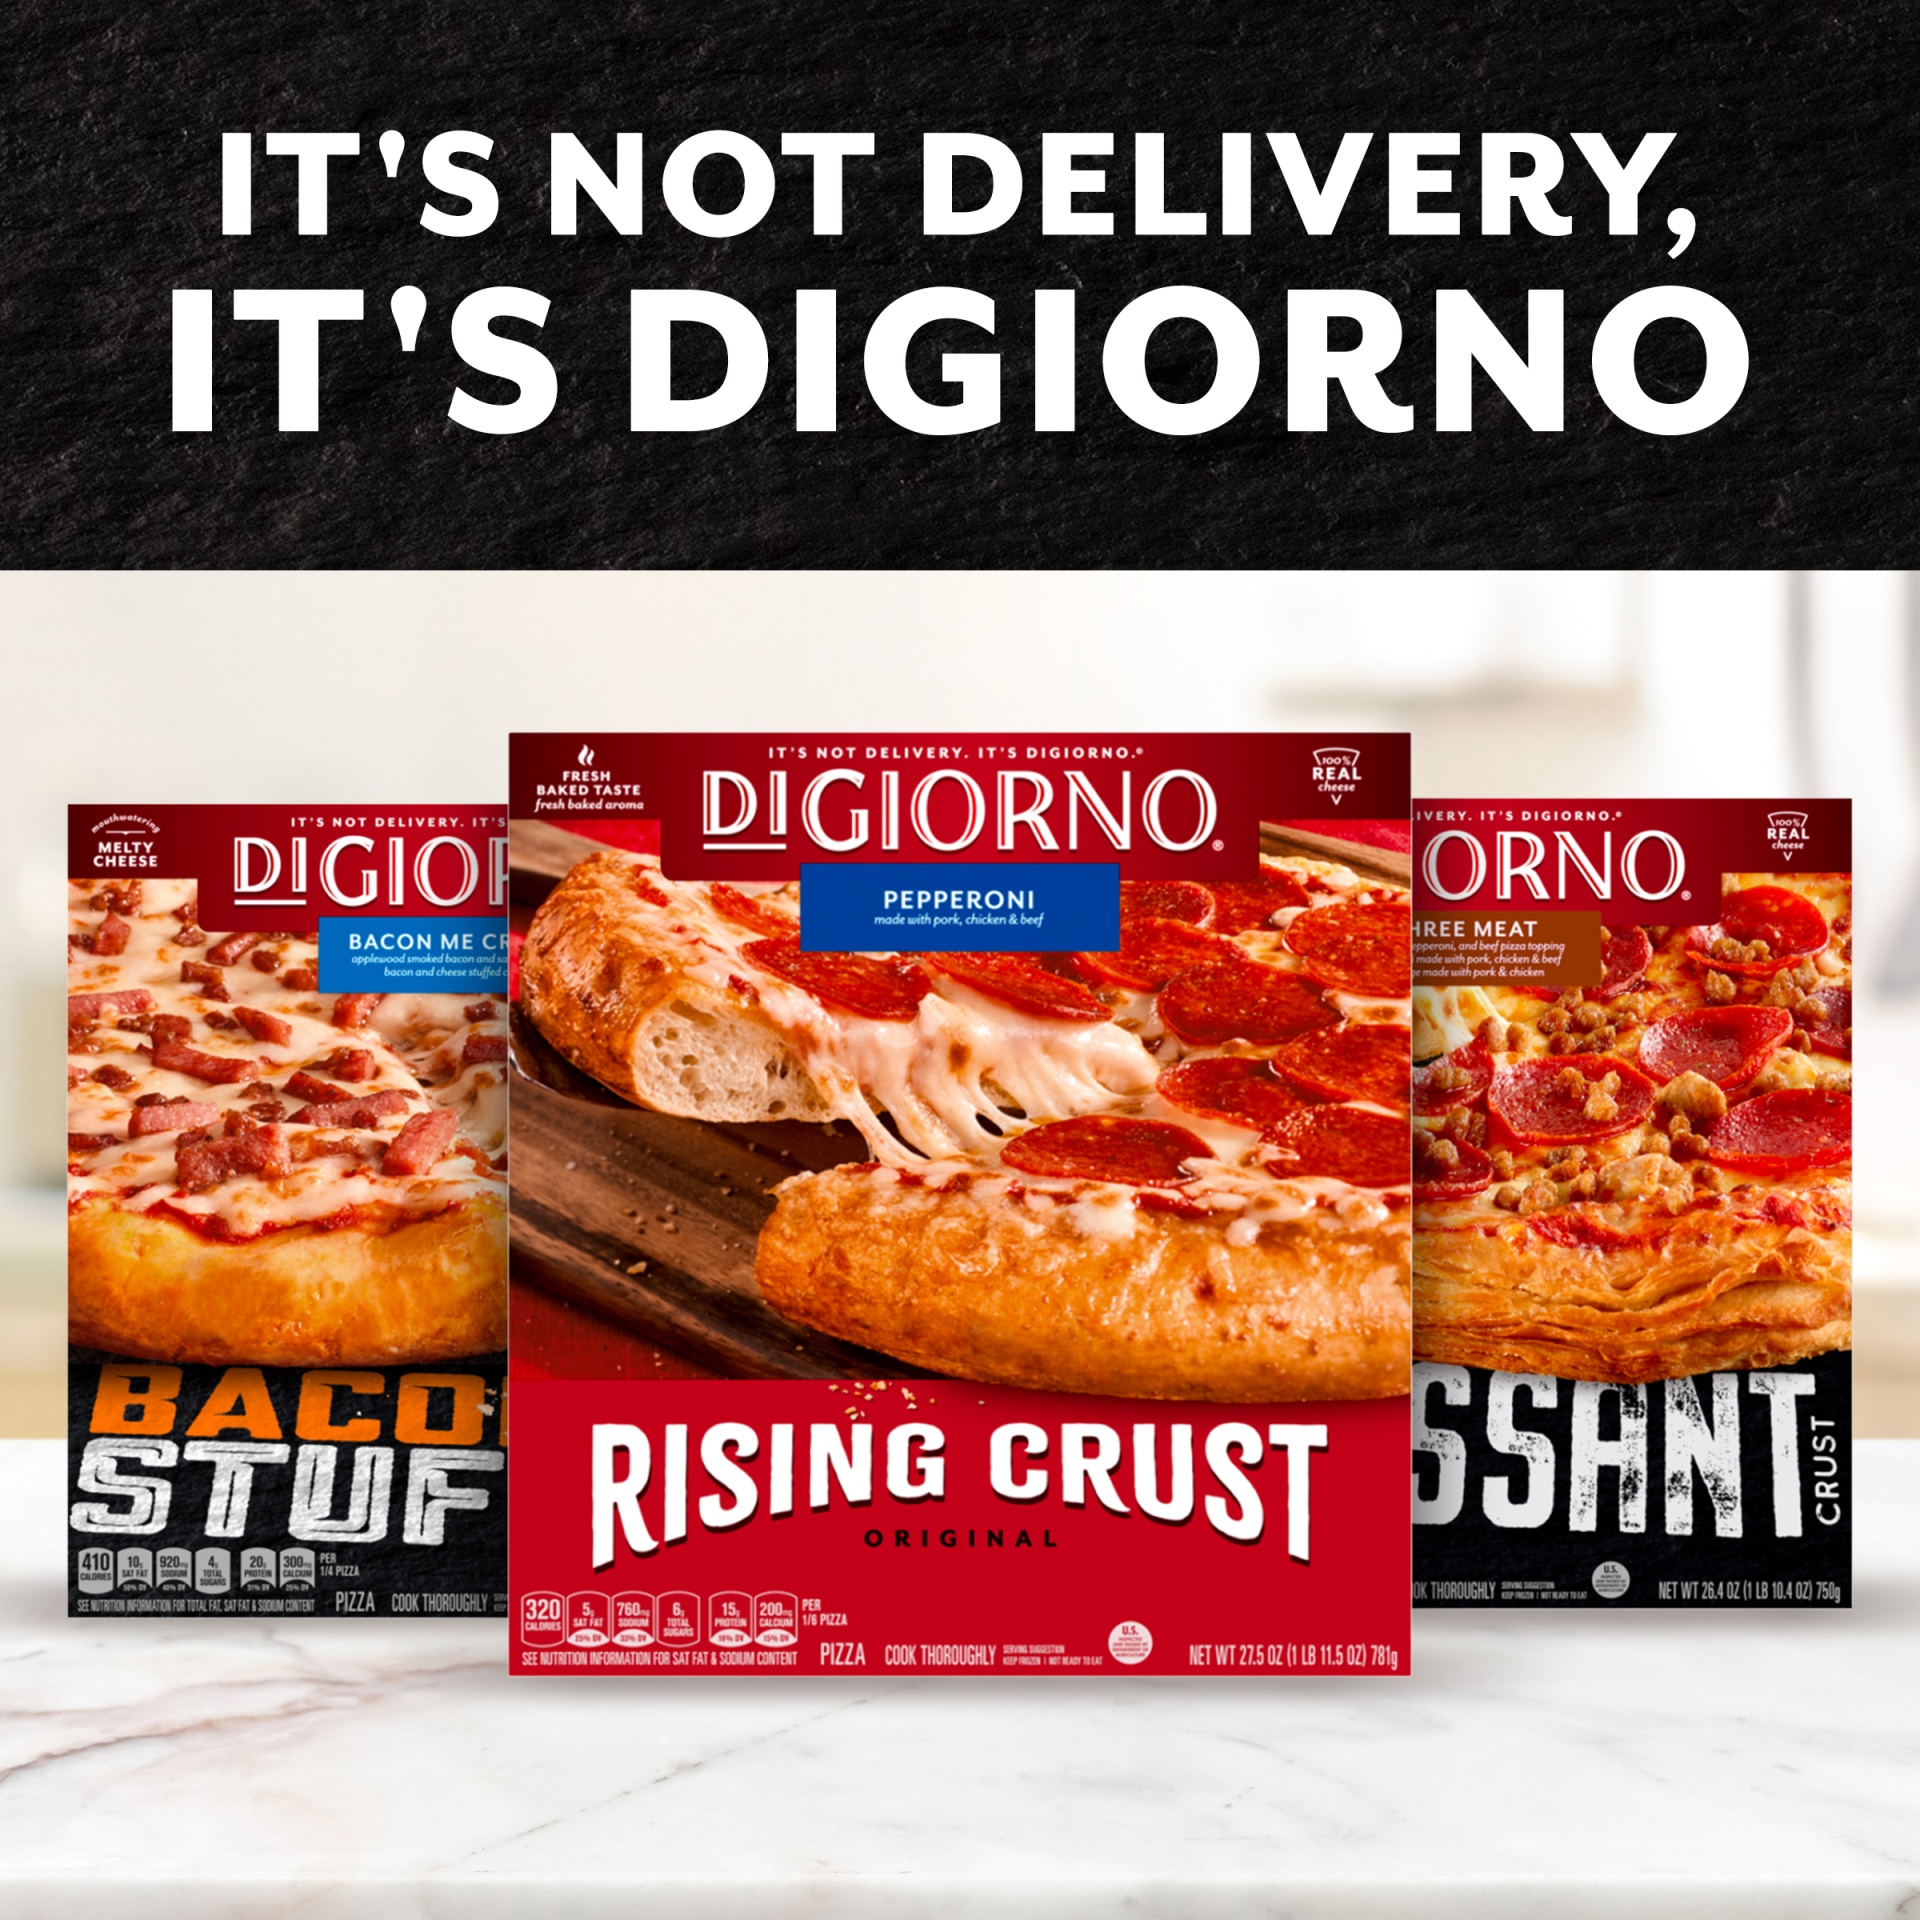 slide 6 of 6, DIGIORNO Pepperoni Frozen Pizza with Hand-Tossed Style Crust, 18.7 oz